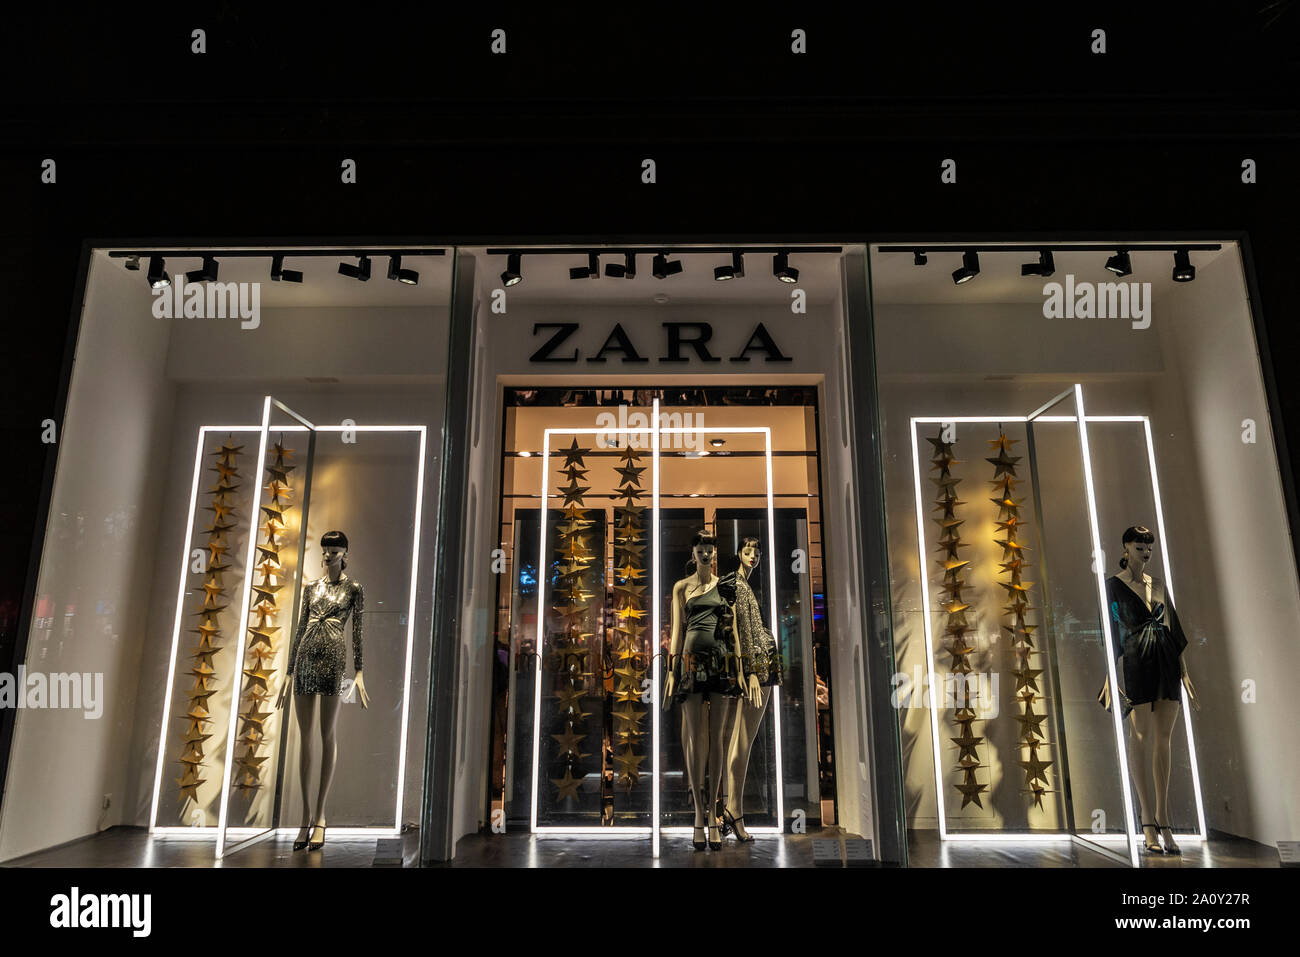 Athens, Greece - December 31, 2018: Display of a Zara store at night in  Athens, Greece Stock Photo - Alamy